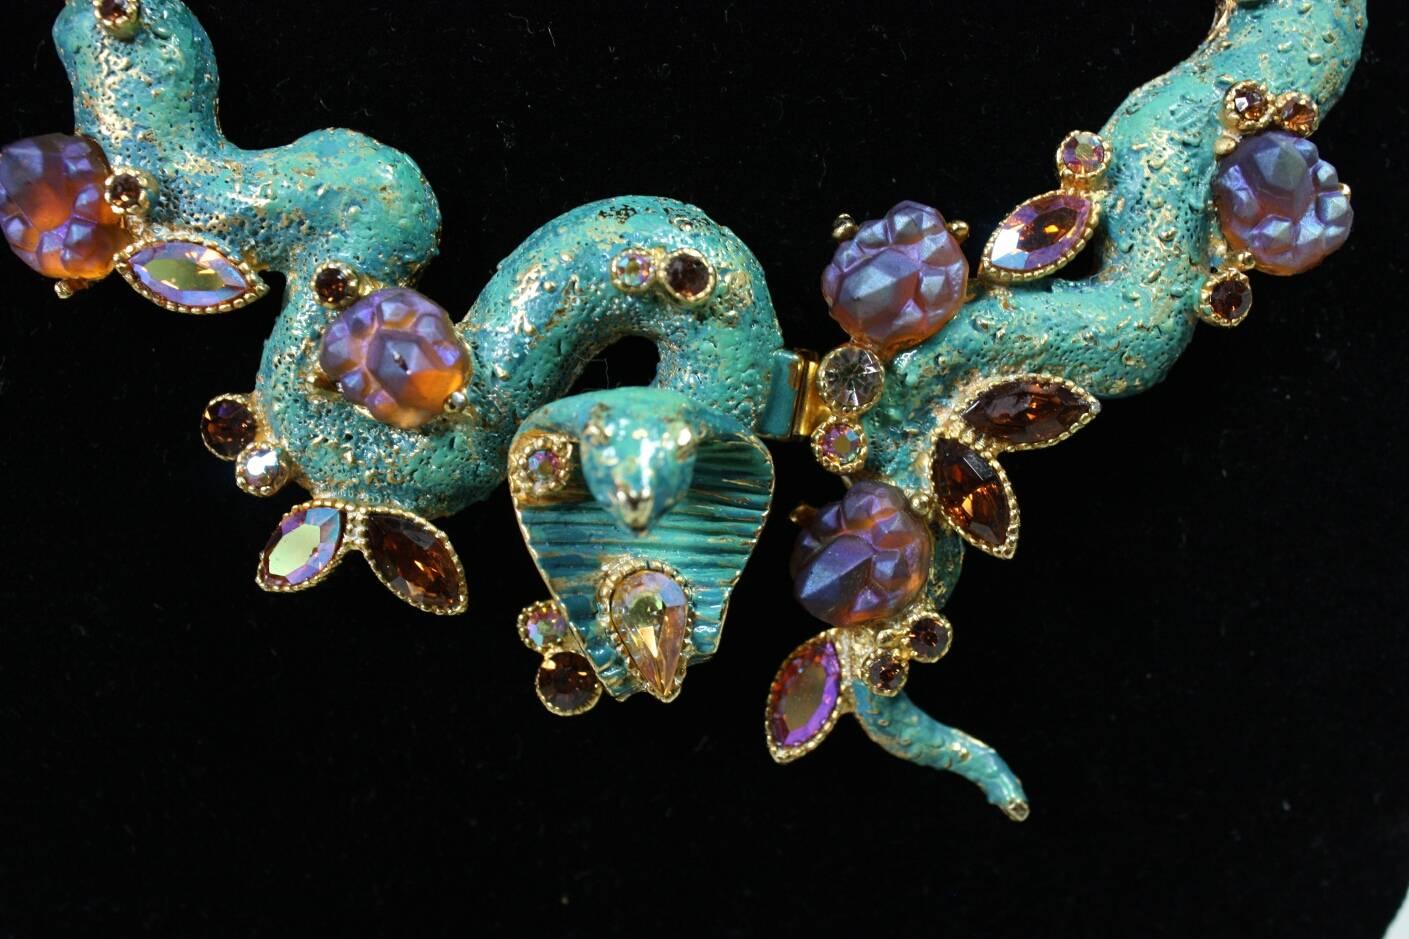 This vintage HAR (short for Hargo Creations) cobra necklace, bracelet and earrings book piece dates to the late 1950's. Light teal green enamel is accented with glass and aurora borealis rhinestones. This iconic design was made exceptionally well.